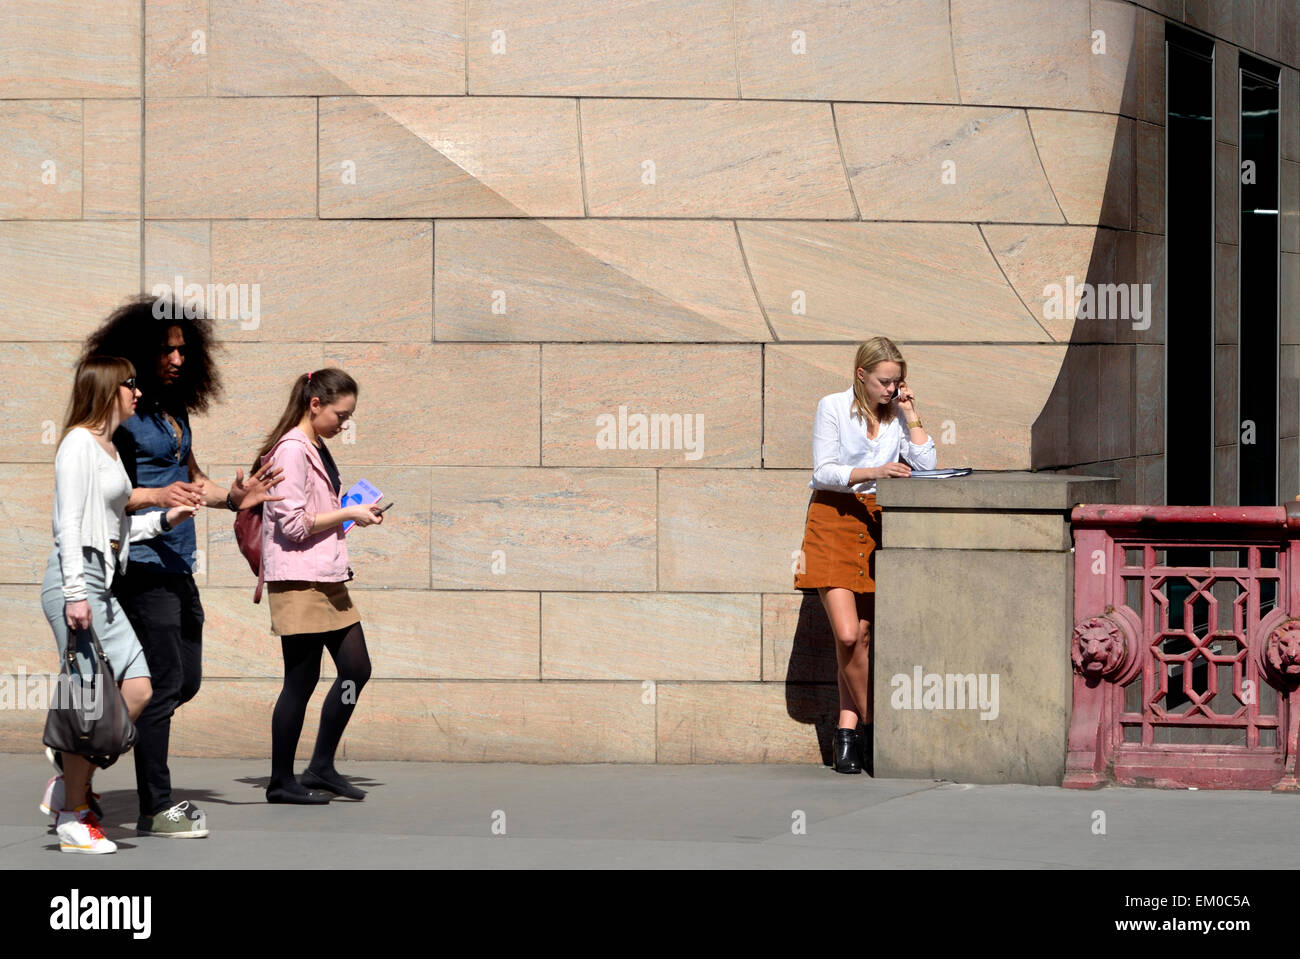 London, England, UK. Young woman in a skirt talking on her mobile phone, Holborn Viaduct Stock Photo